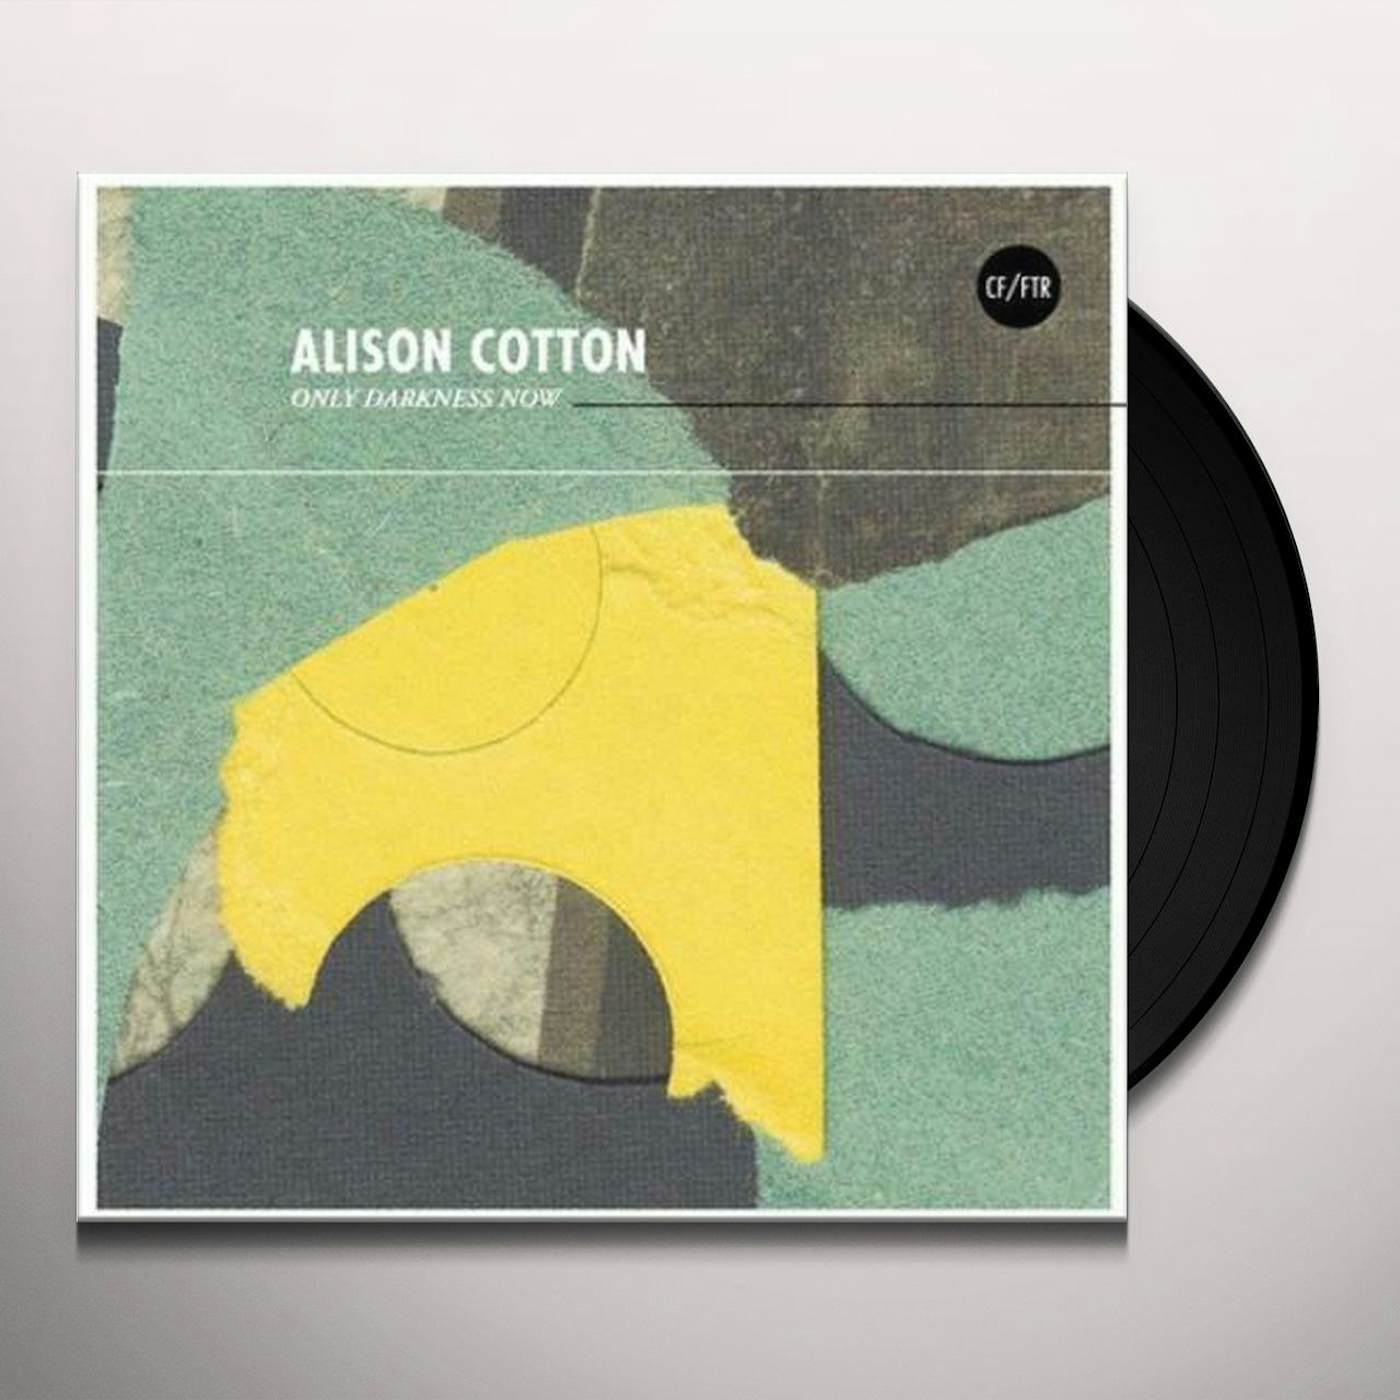 Alison Cotton Only Darkness Now Vinyl Record